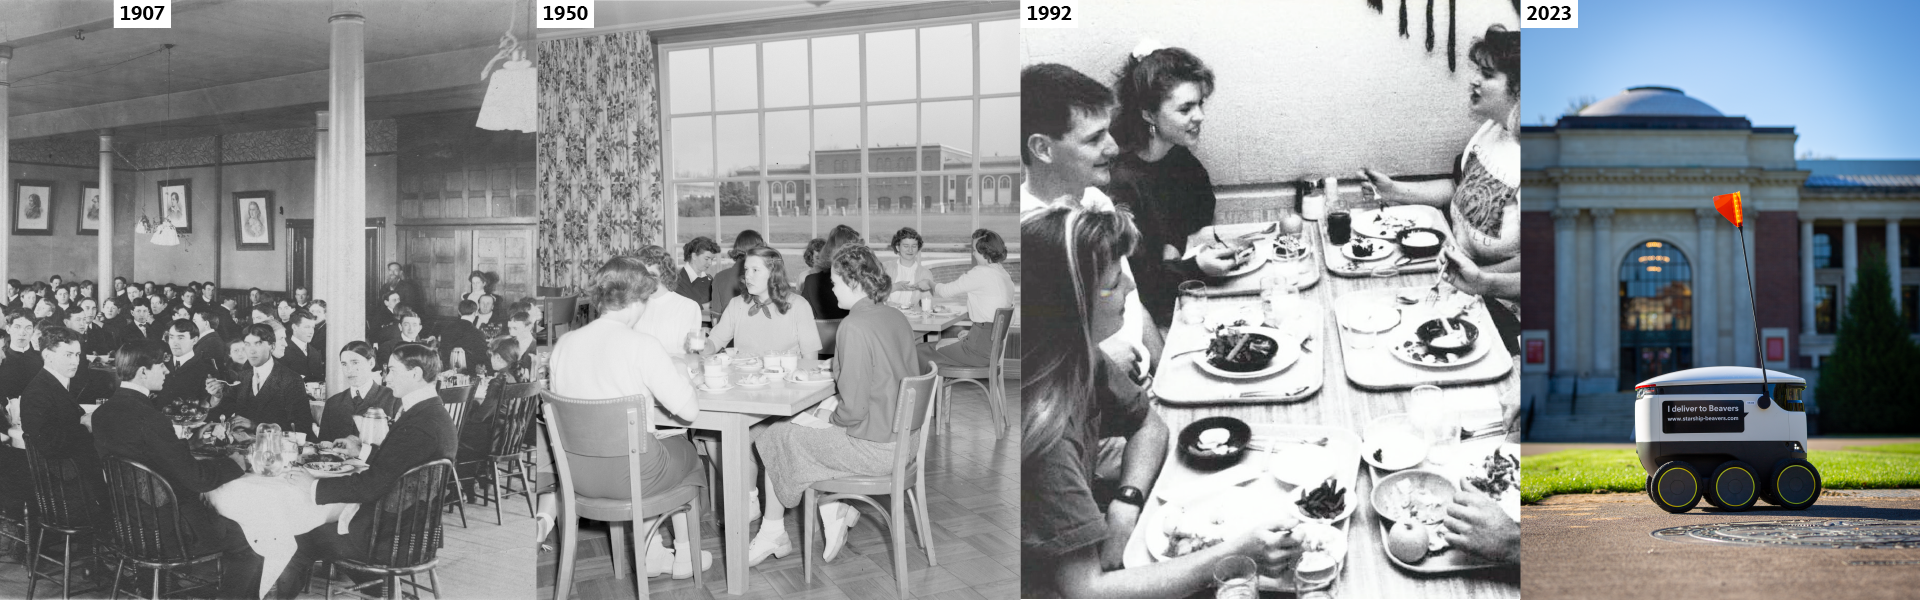 A collage of images relating to OSU dining halls since 1907